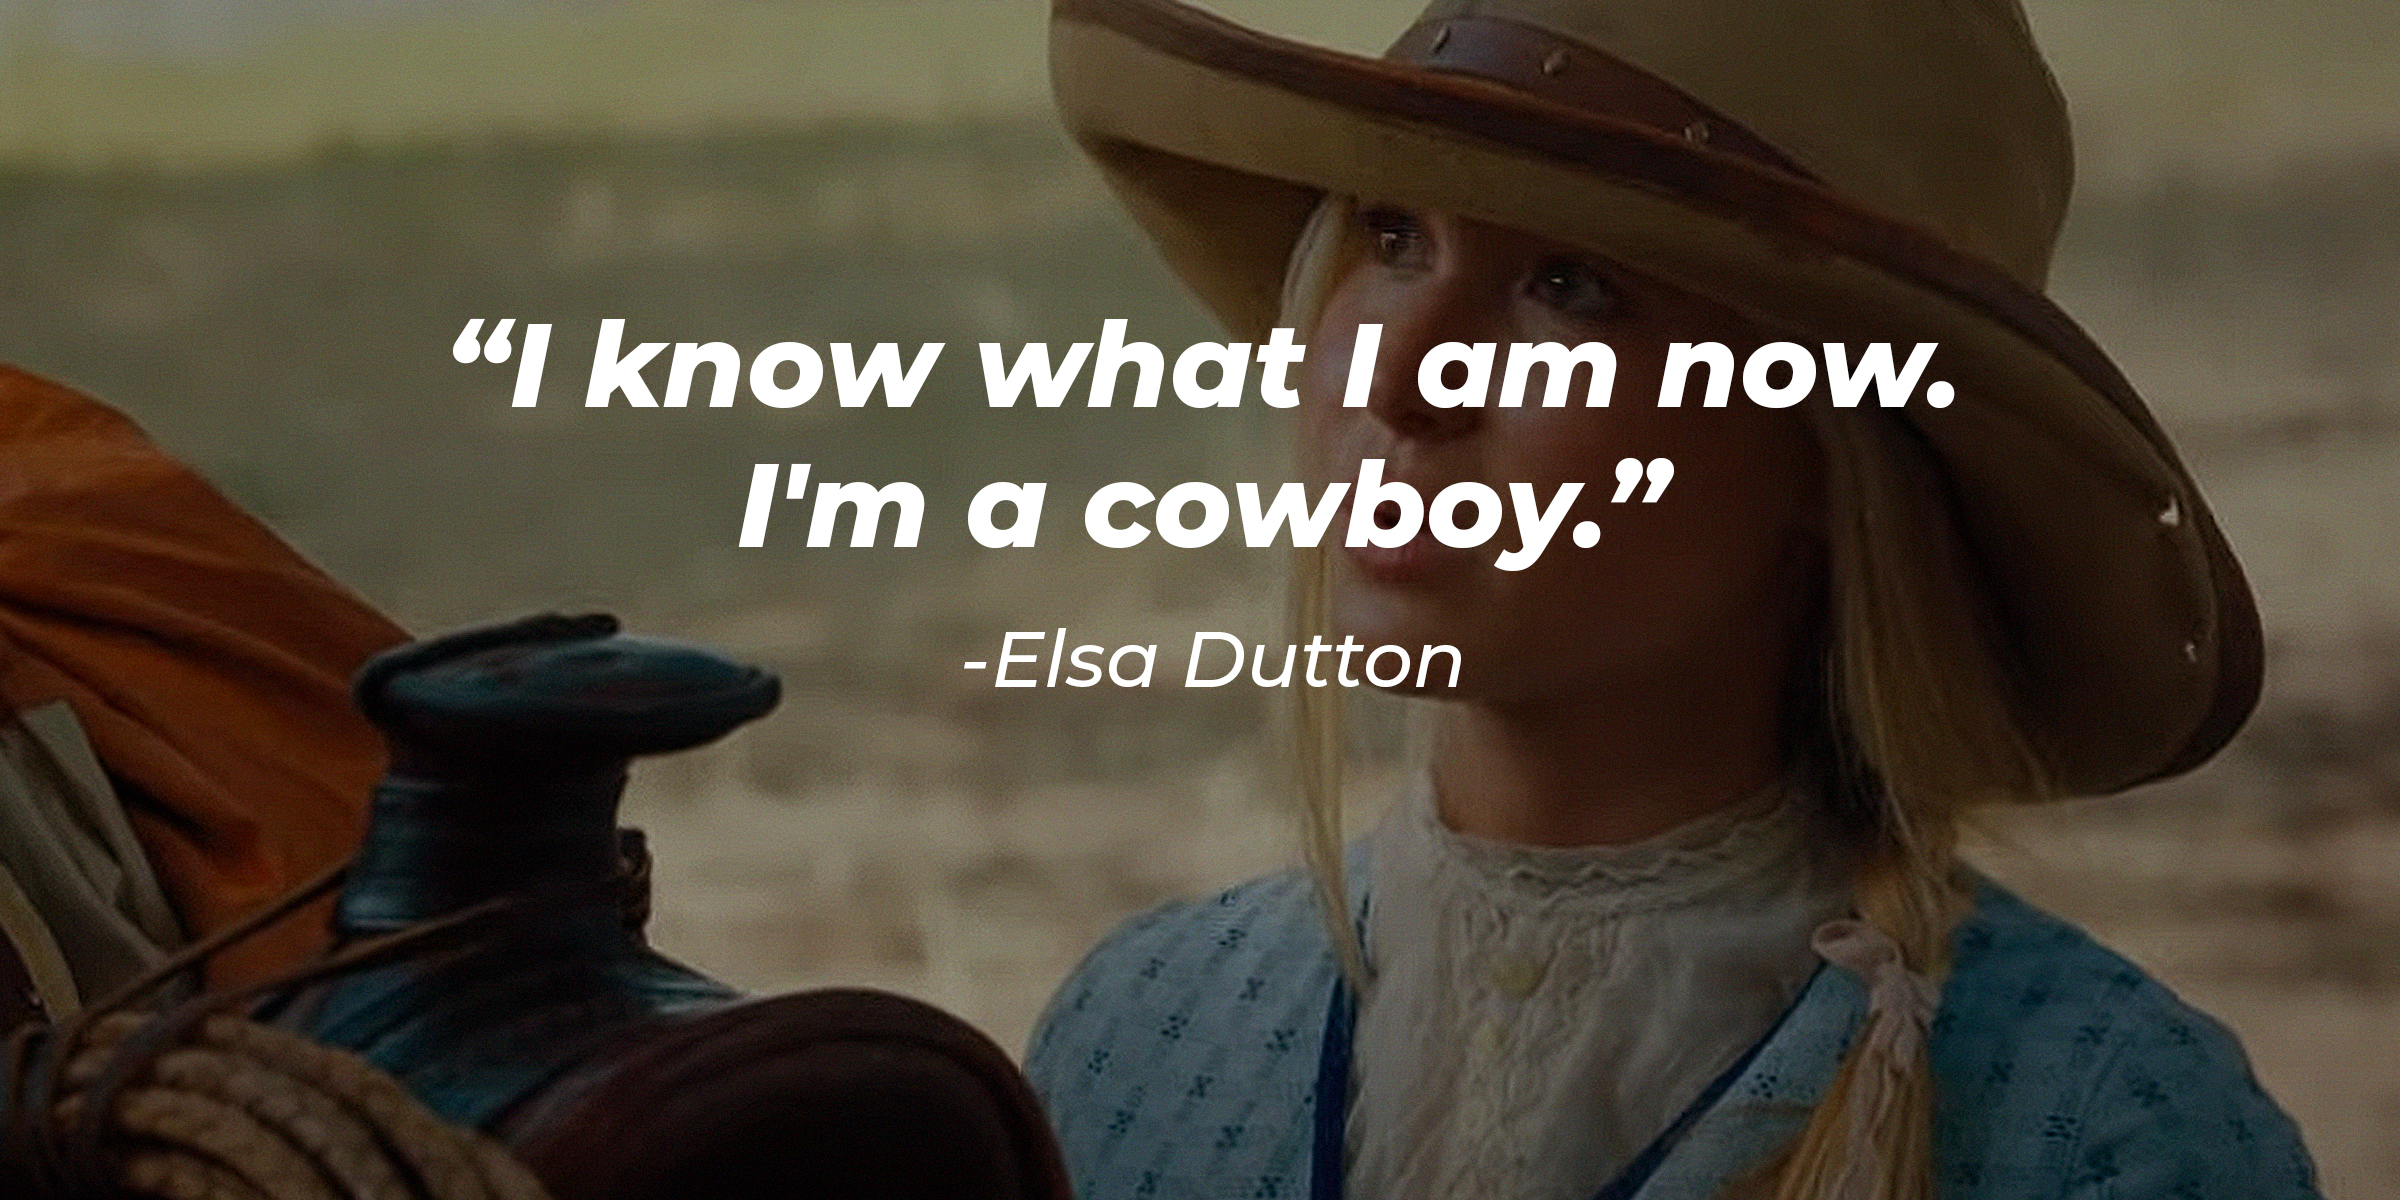 A photo of Elsa Dutton with the quote, "I know what I am now. I'm a cowboy." | Source: youtube.com/paramountplusuk